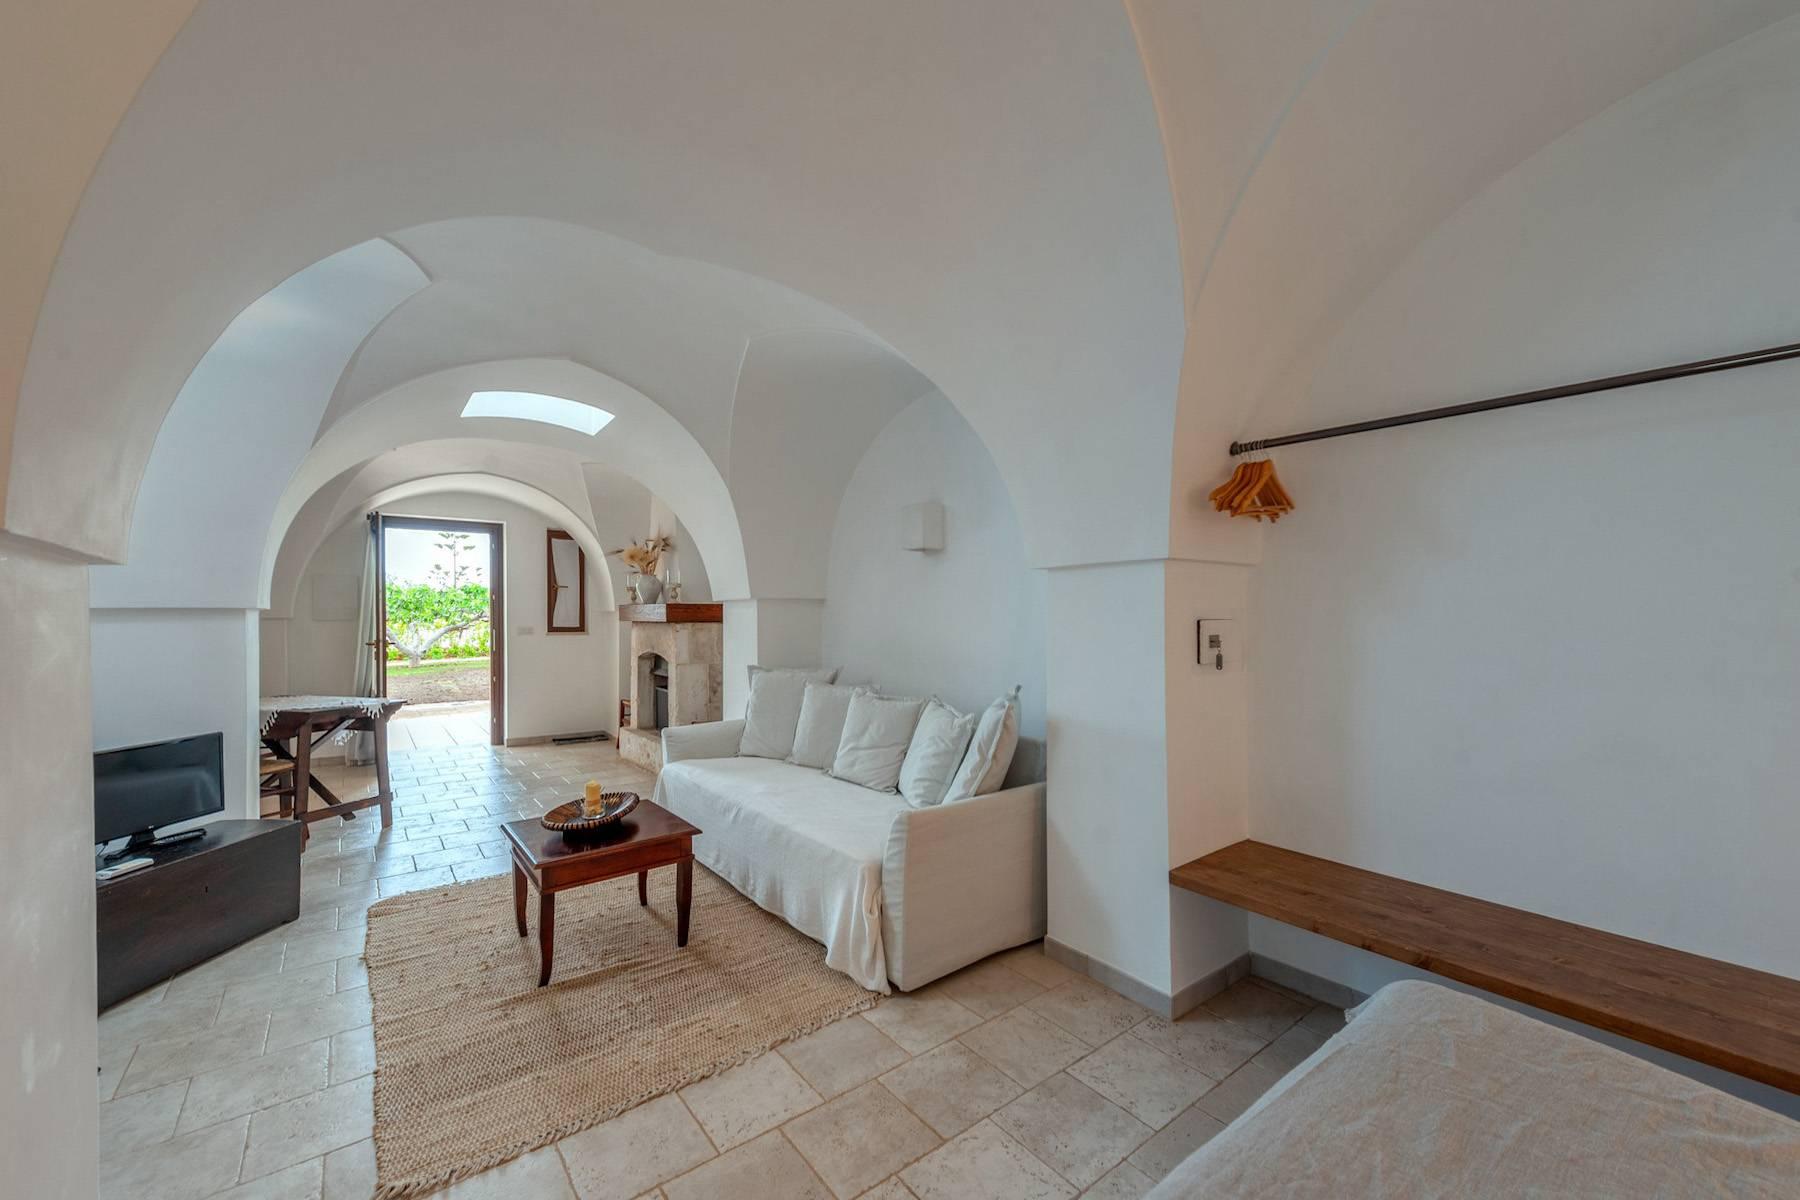 Charming 18th century Masseria surrounded by centuries-old olive trees - 21